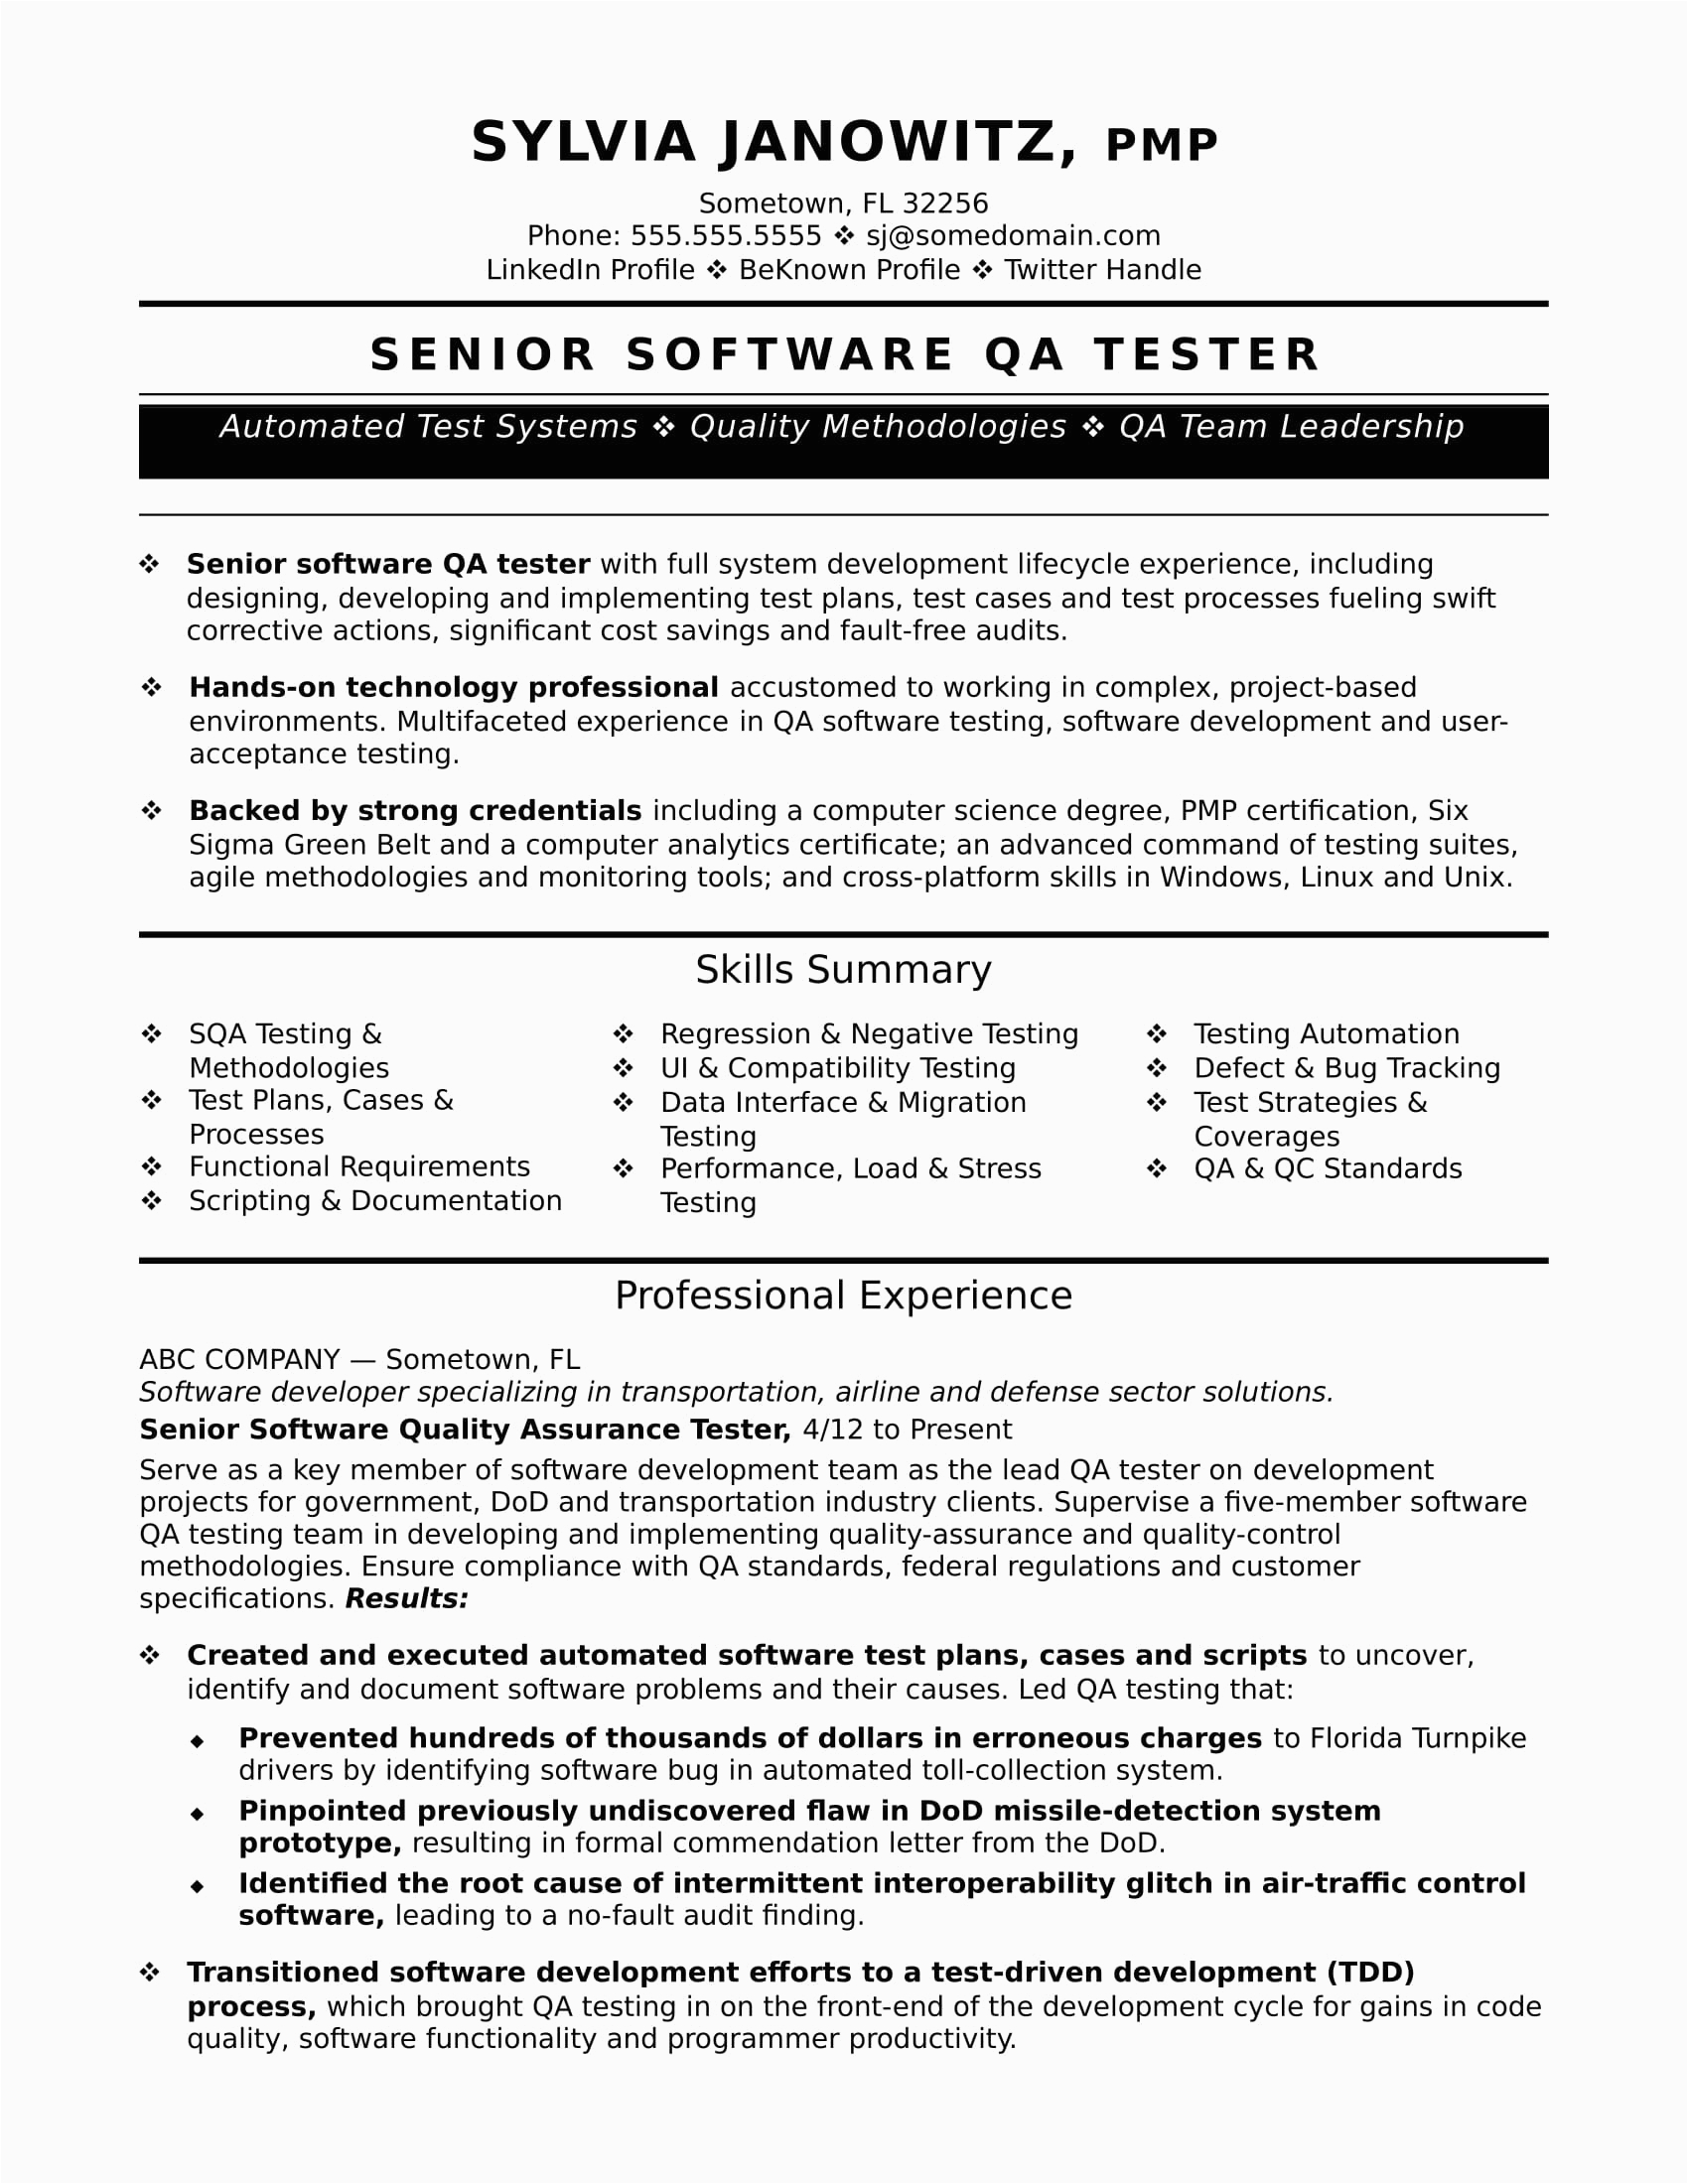 Software Testing Resume Samples for 2 Years Experience Experienced Qa software Tester Resume Sample